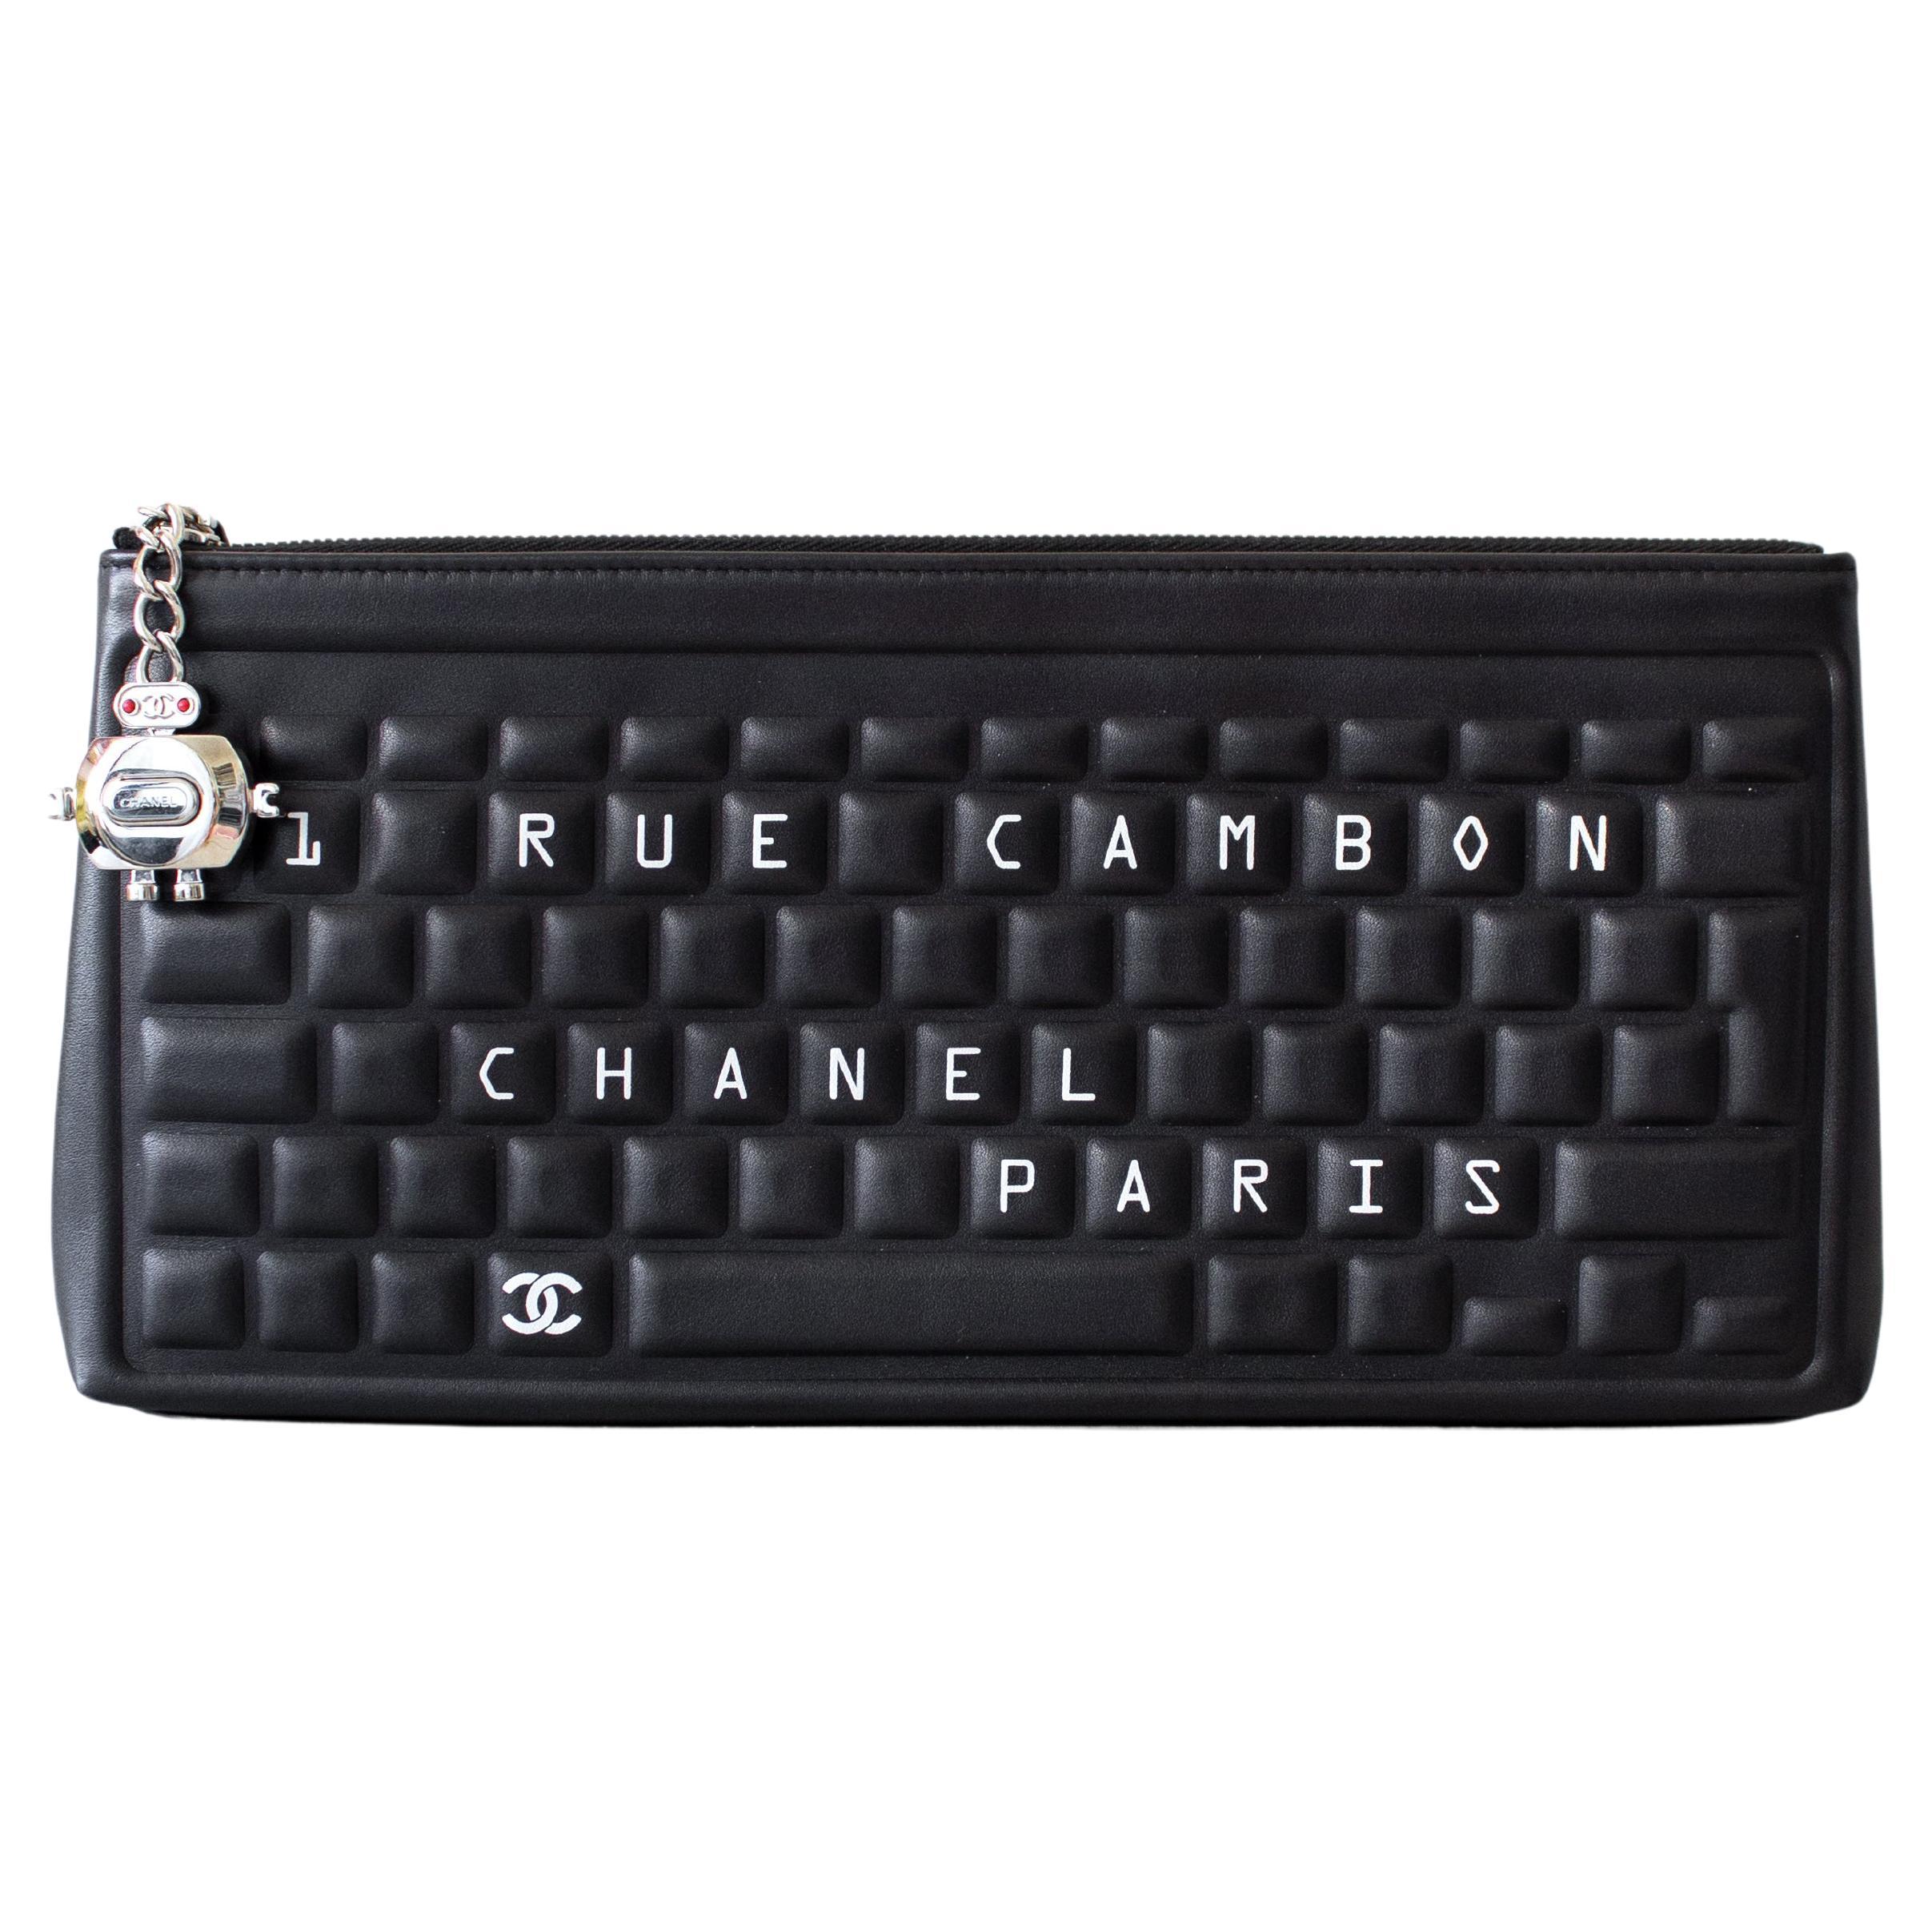 Chanel S/S 2017 Data Center Black Silver Robot Cocobot Leather Keyboard Clutch  For Sale